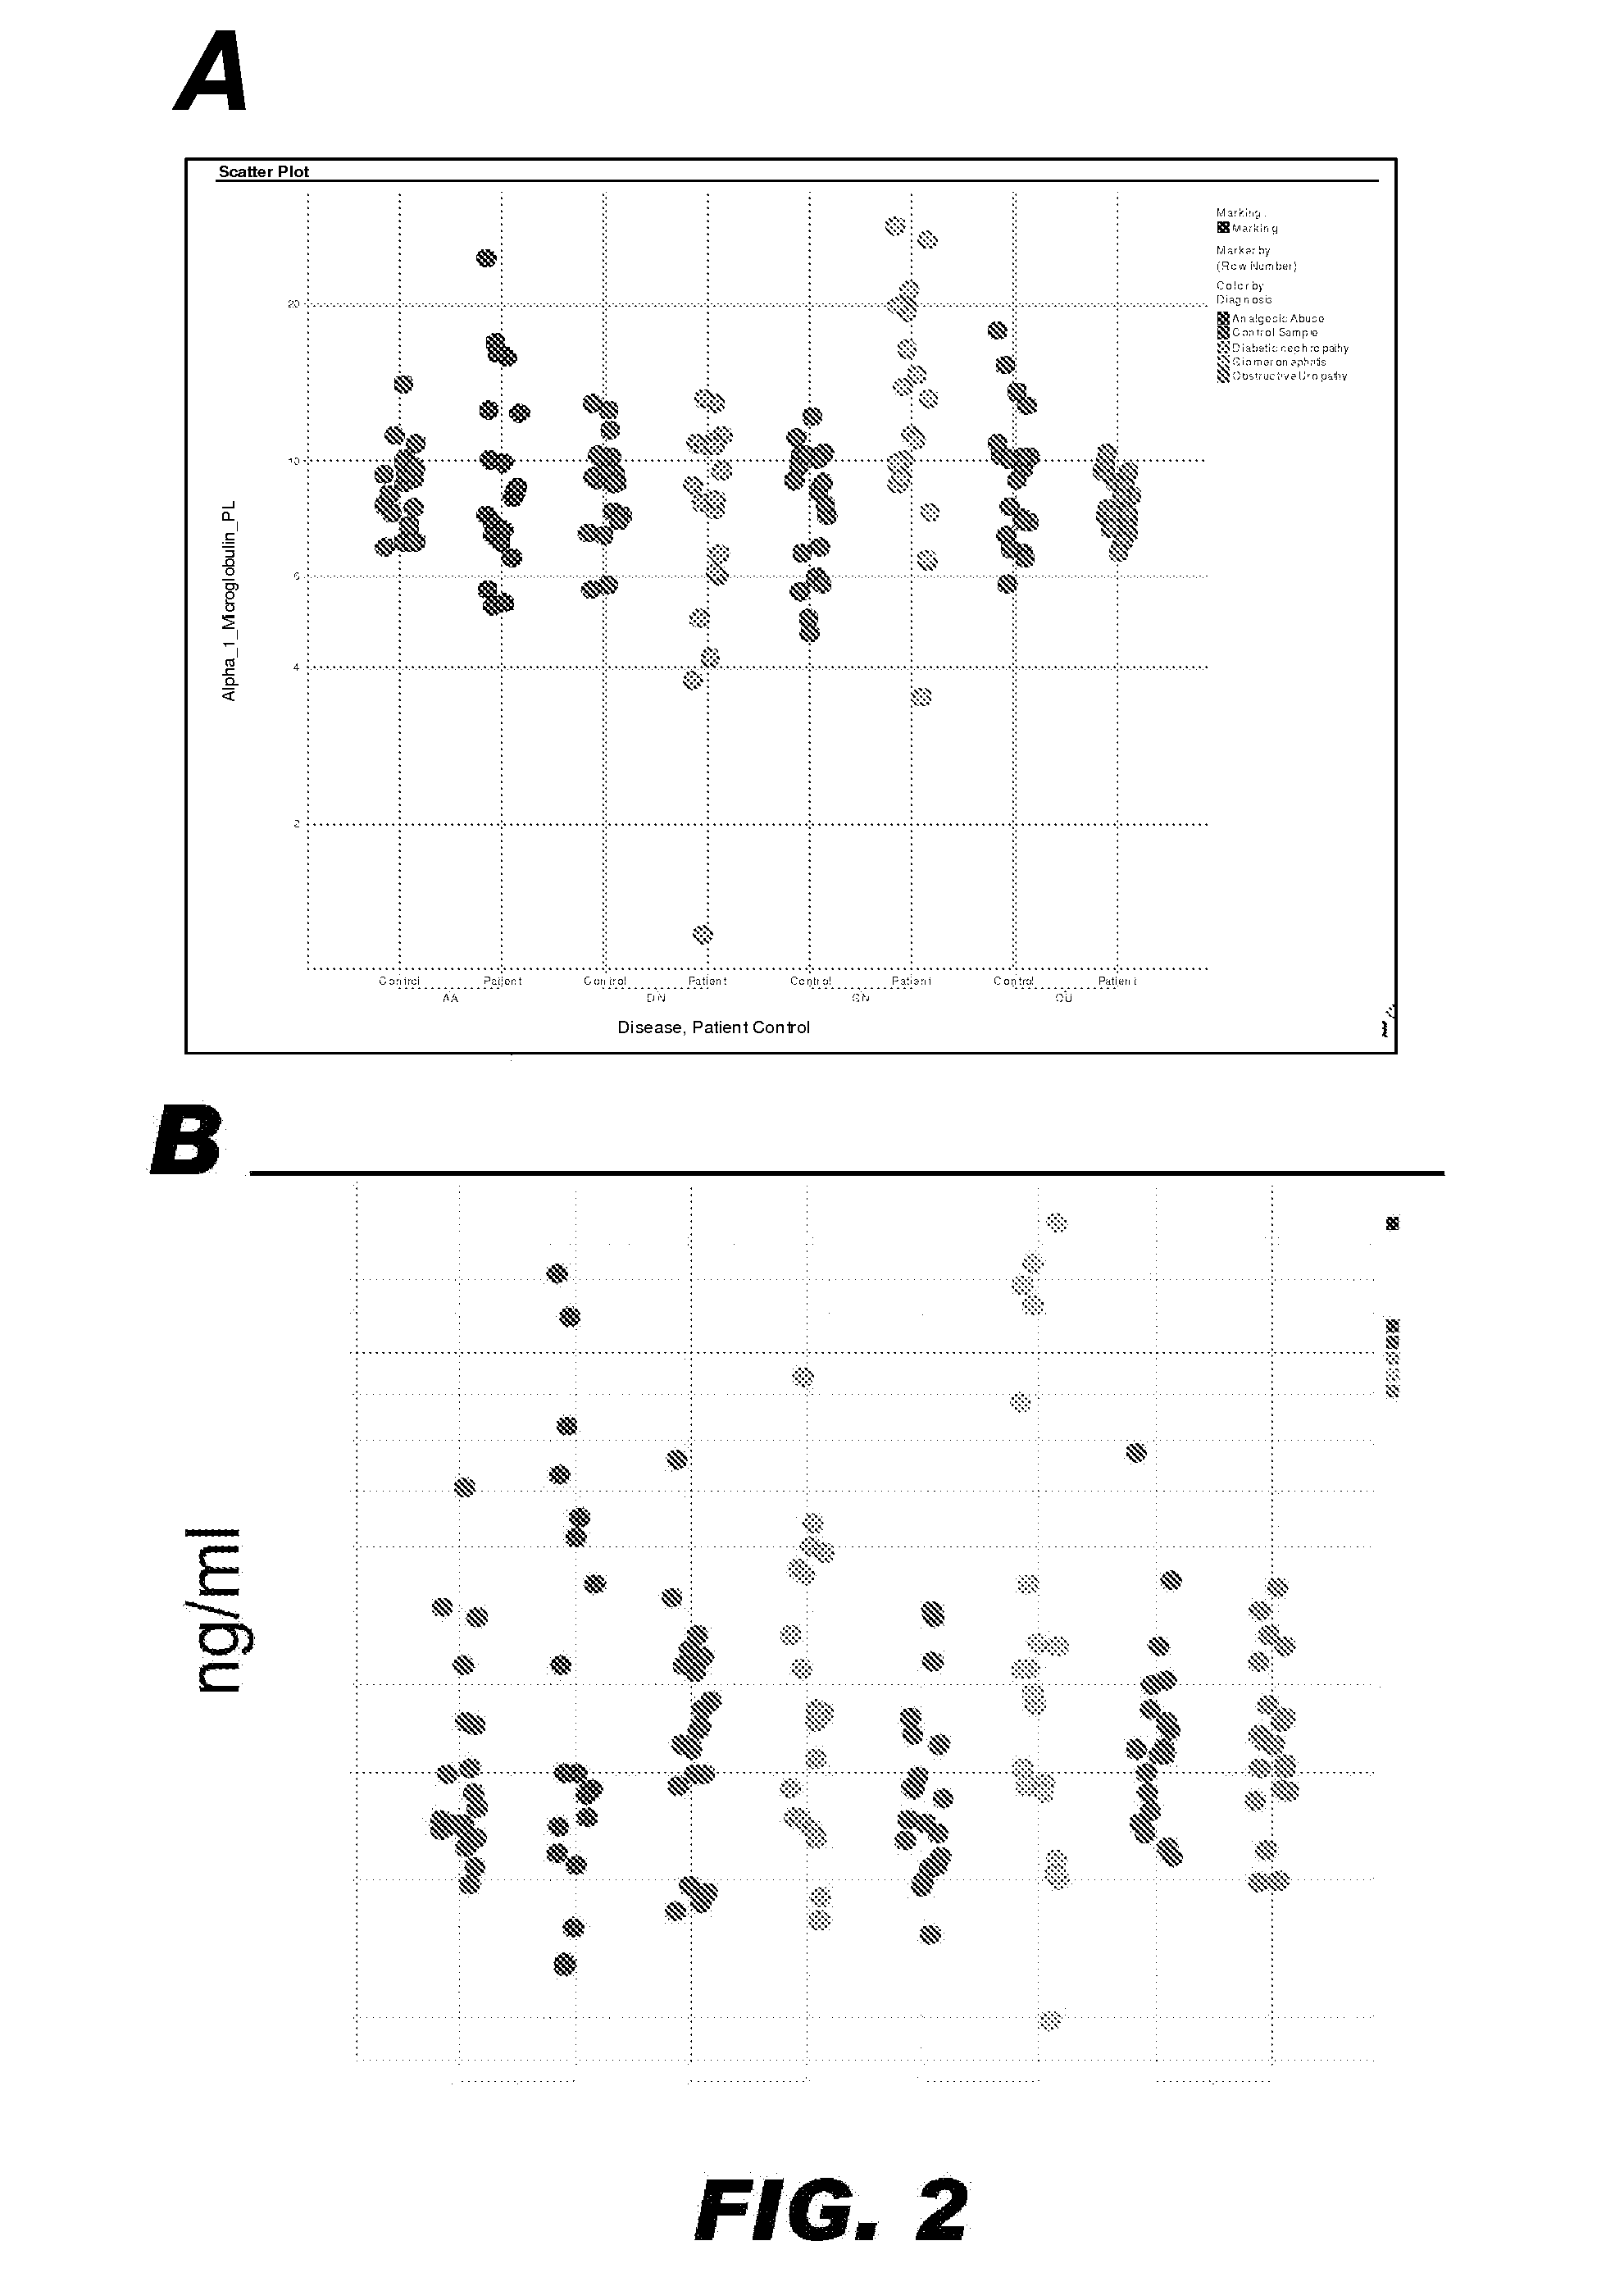 Methods and Devices for Detecting Glomerulonephritis and Associated Disorders